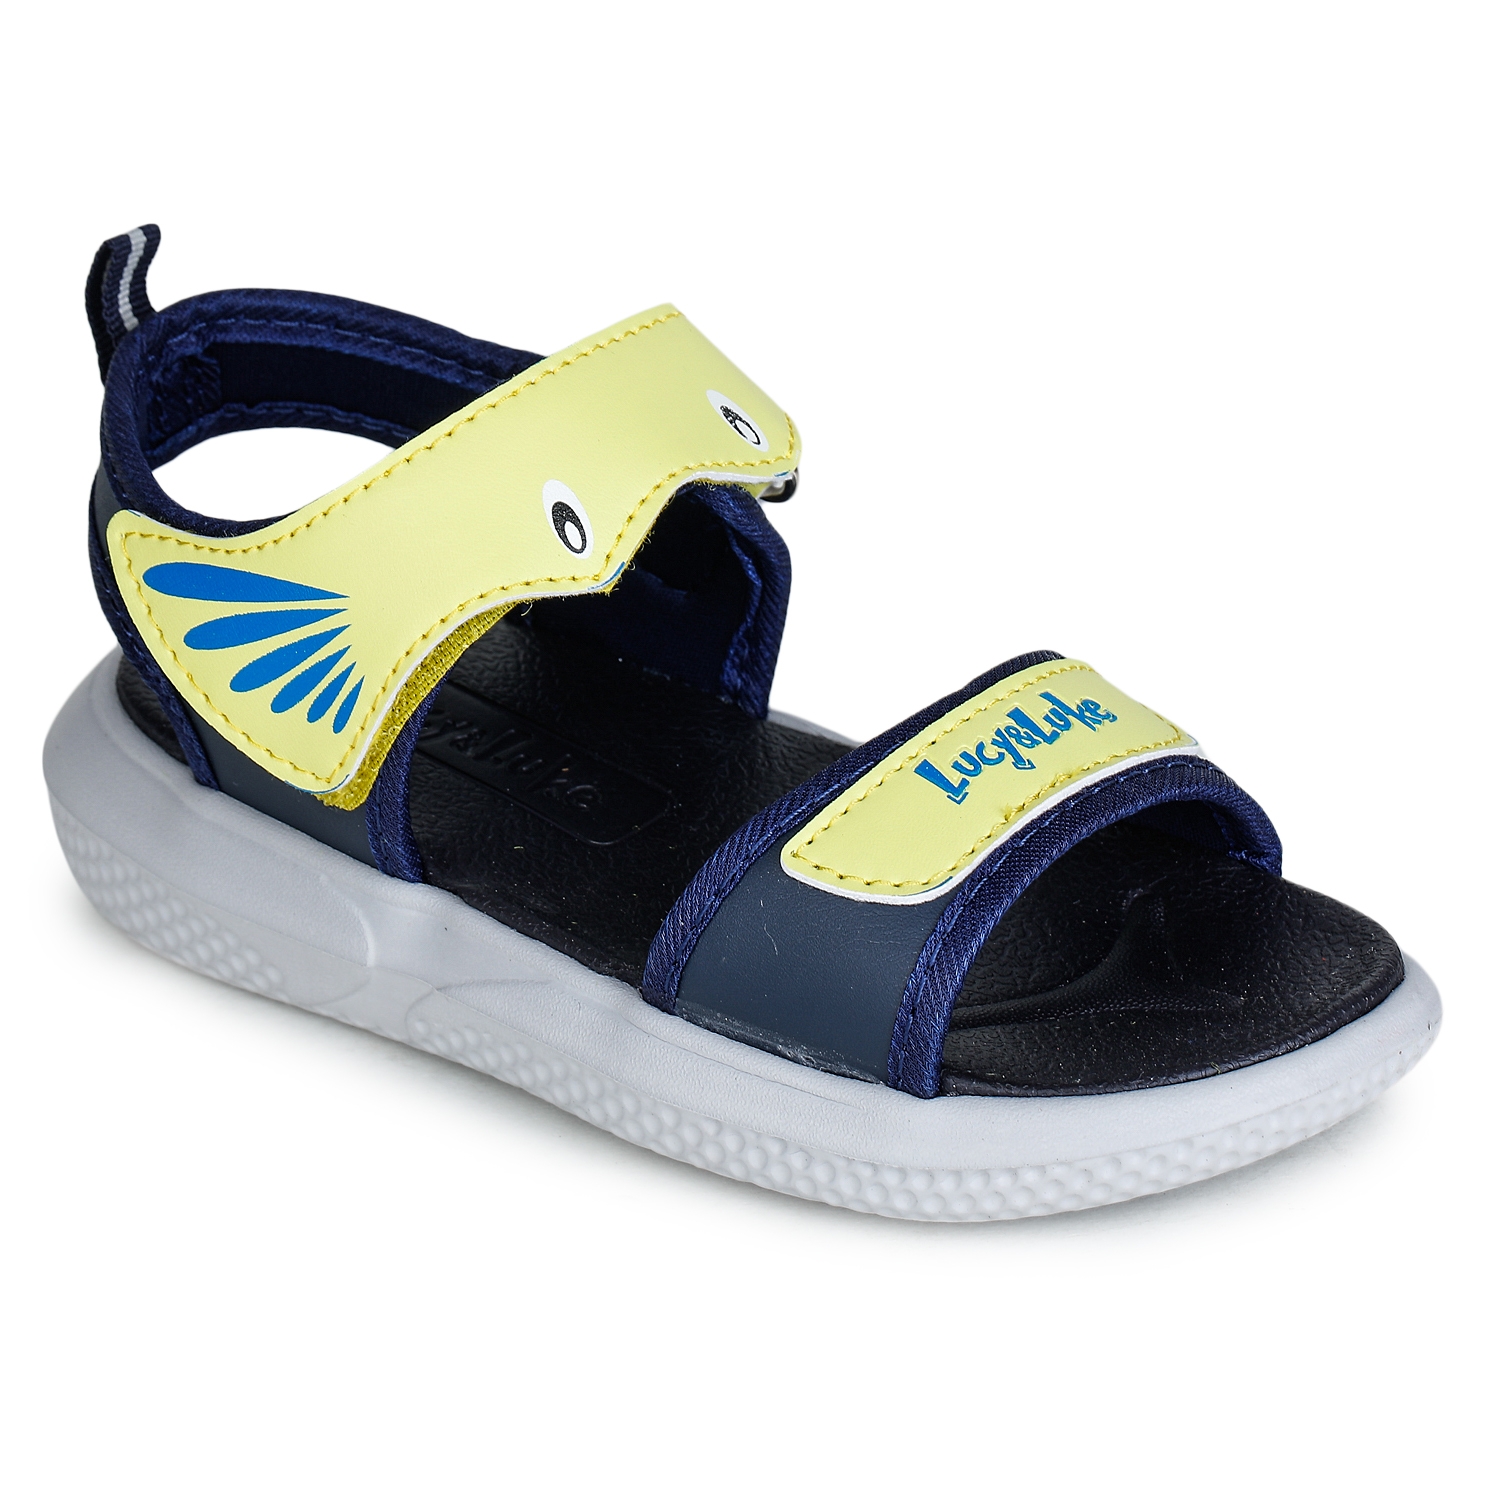 Lucy & Luke by Liberty HIPPO-1 Yellow Sandals for Kids